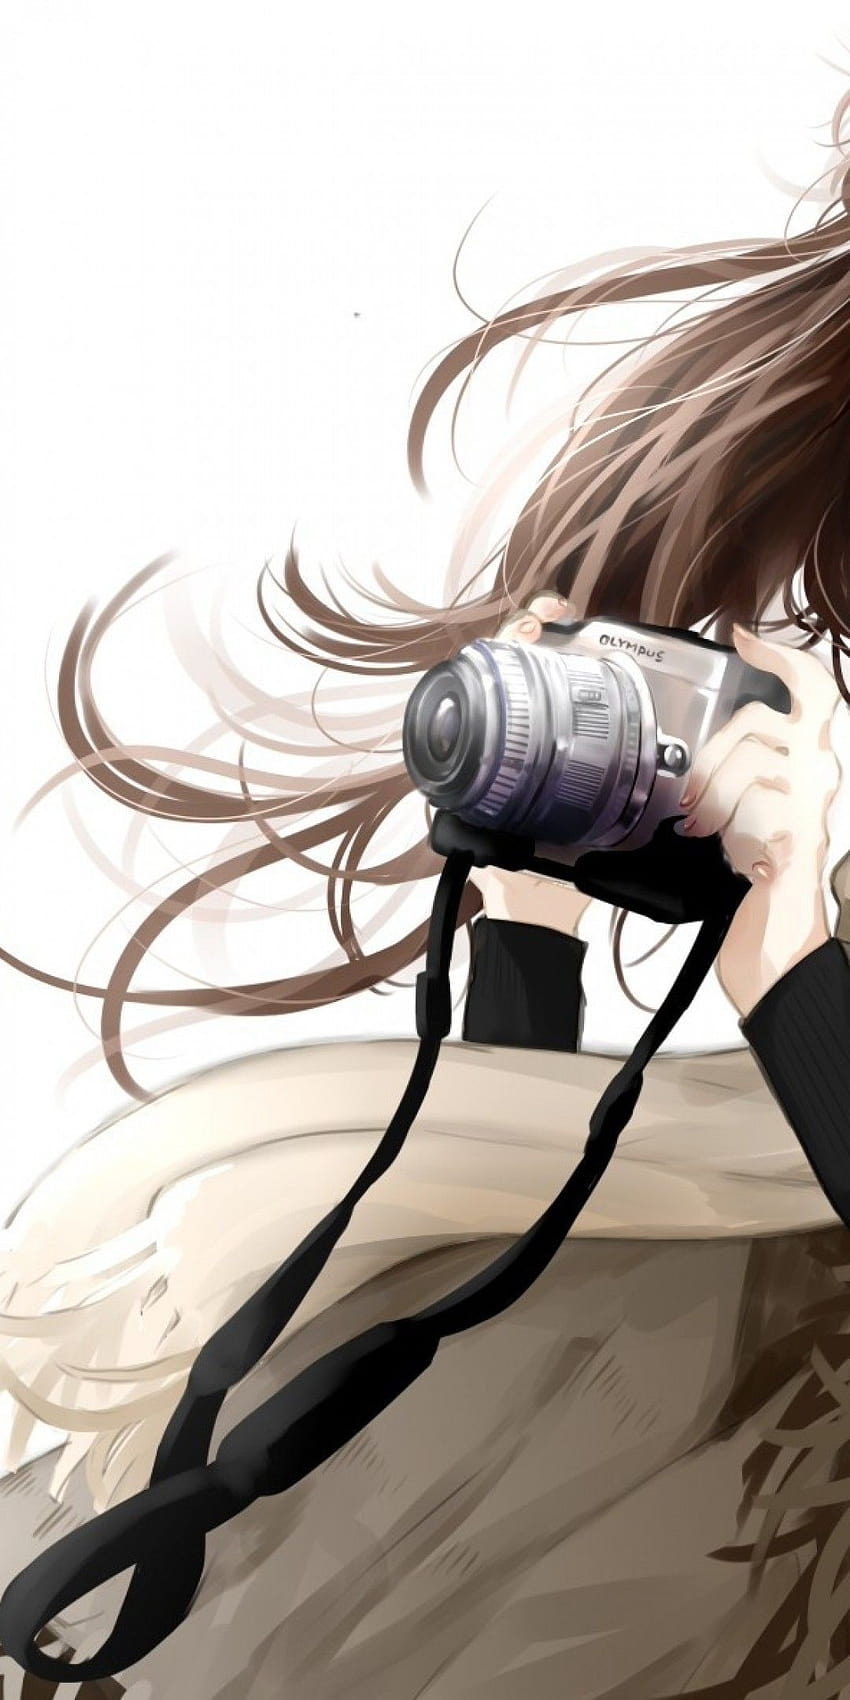 anime girl camera by luciano893 on DeviantArt